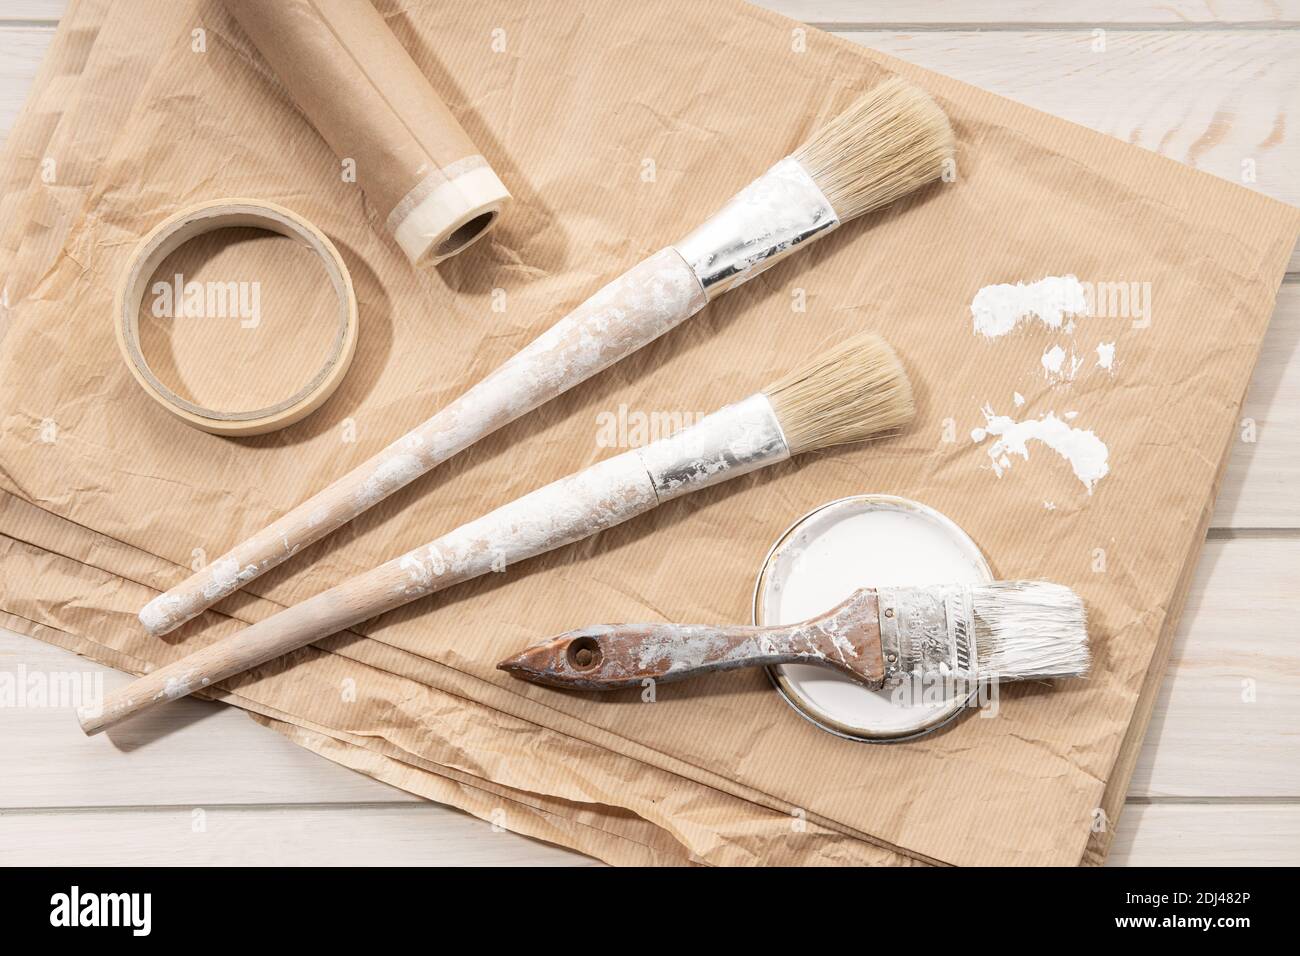 Set of painting tools brushes, masking tape, paper. DIY Home Improvement Paint. Top view Stock Photo